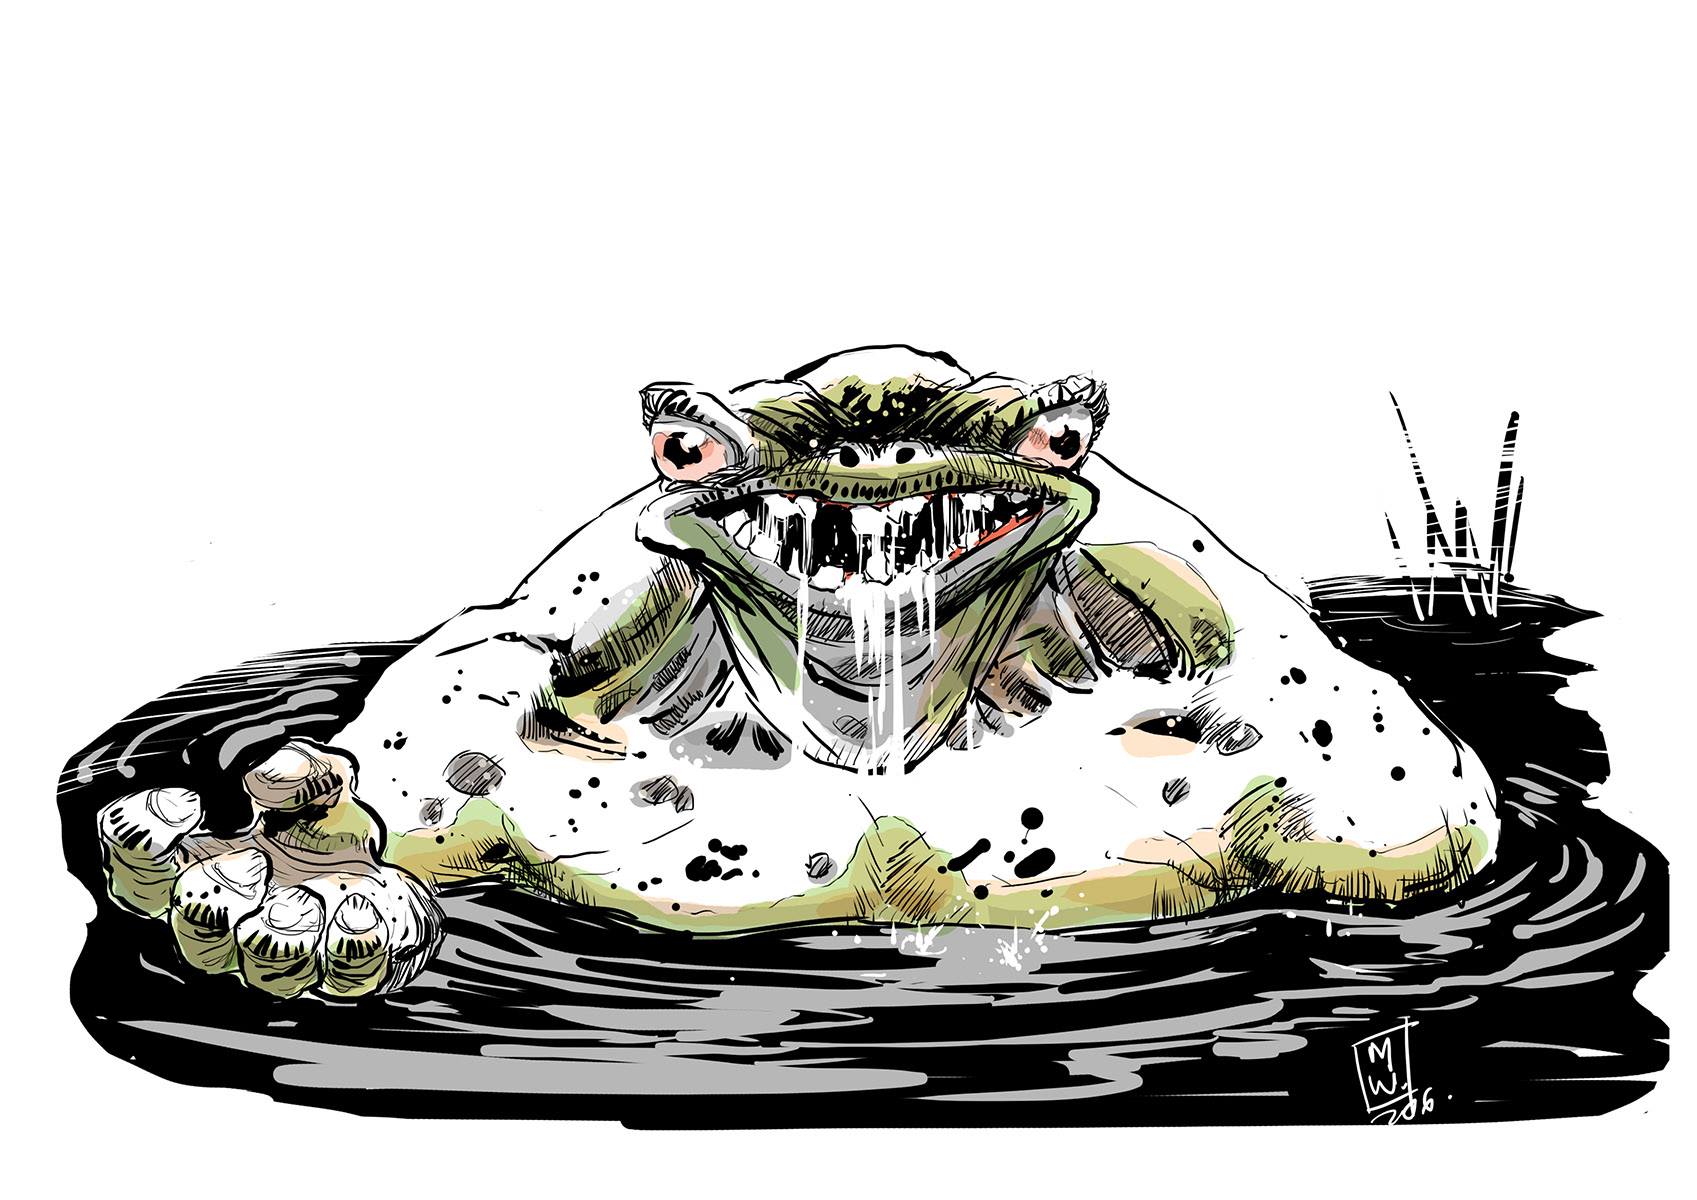 Sketch of a scary, muscular toad peering out of water. The Toad Thing by Movin Were